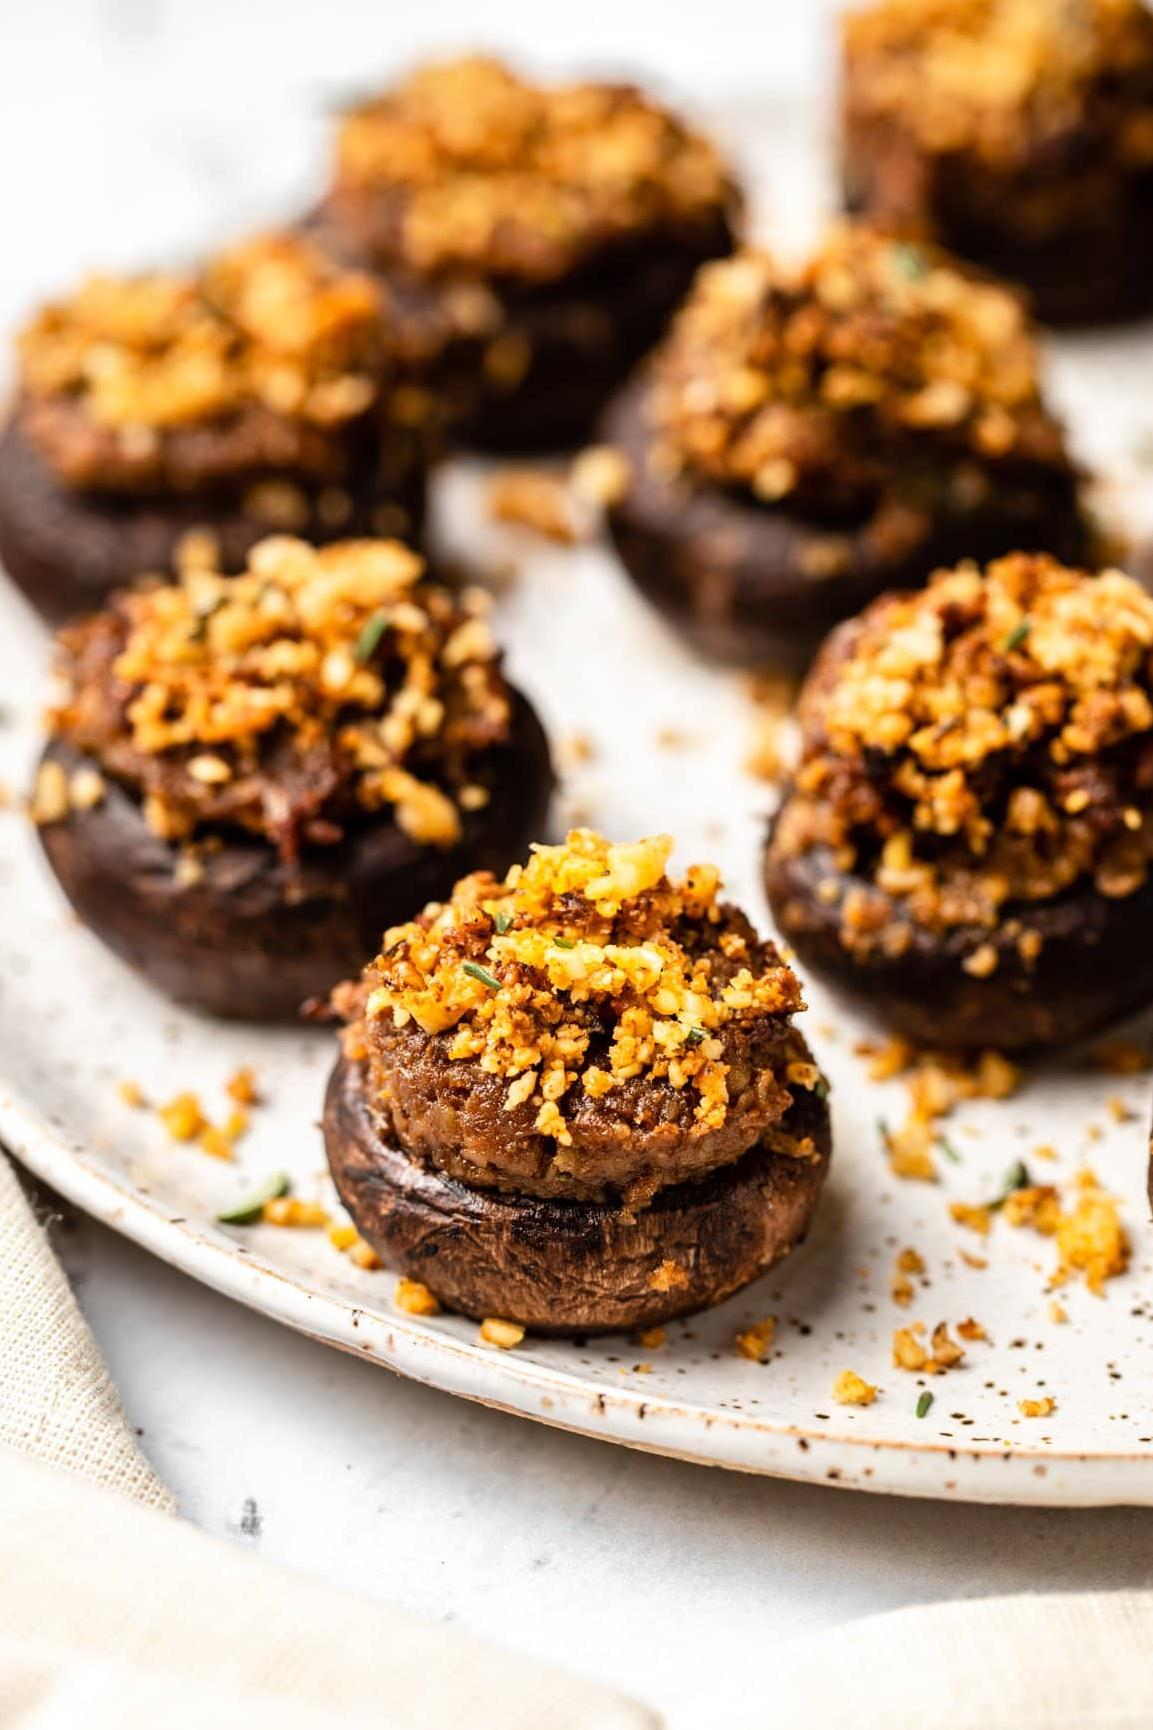  A perfect pairing of meaty Portobello mushrooms and savory Brazil nuts.